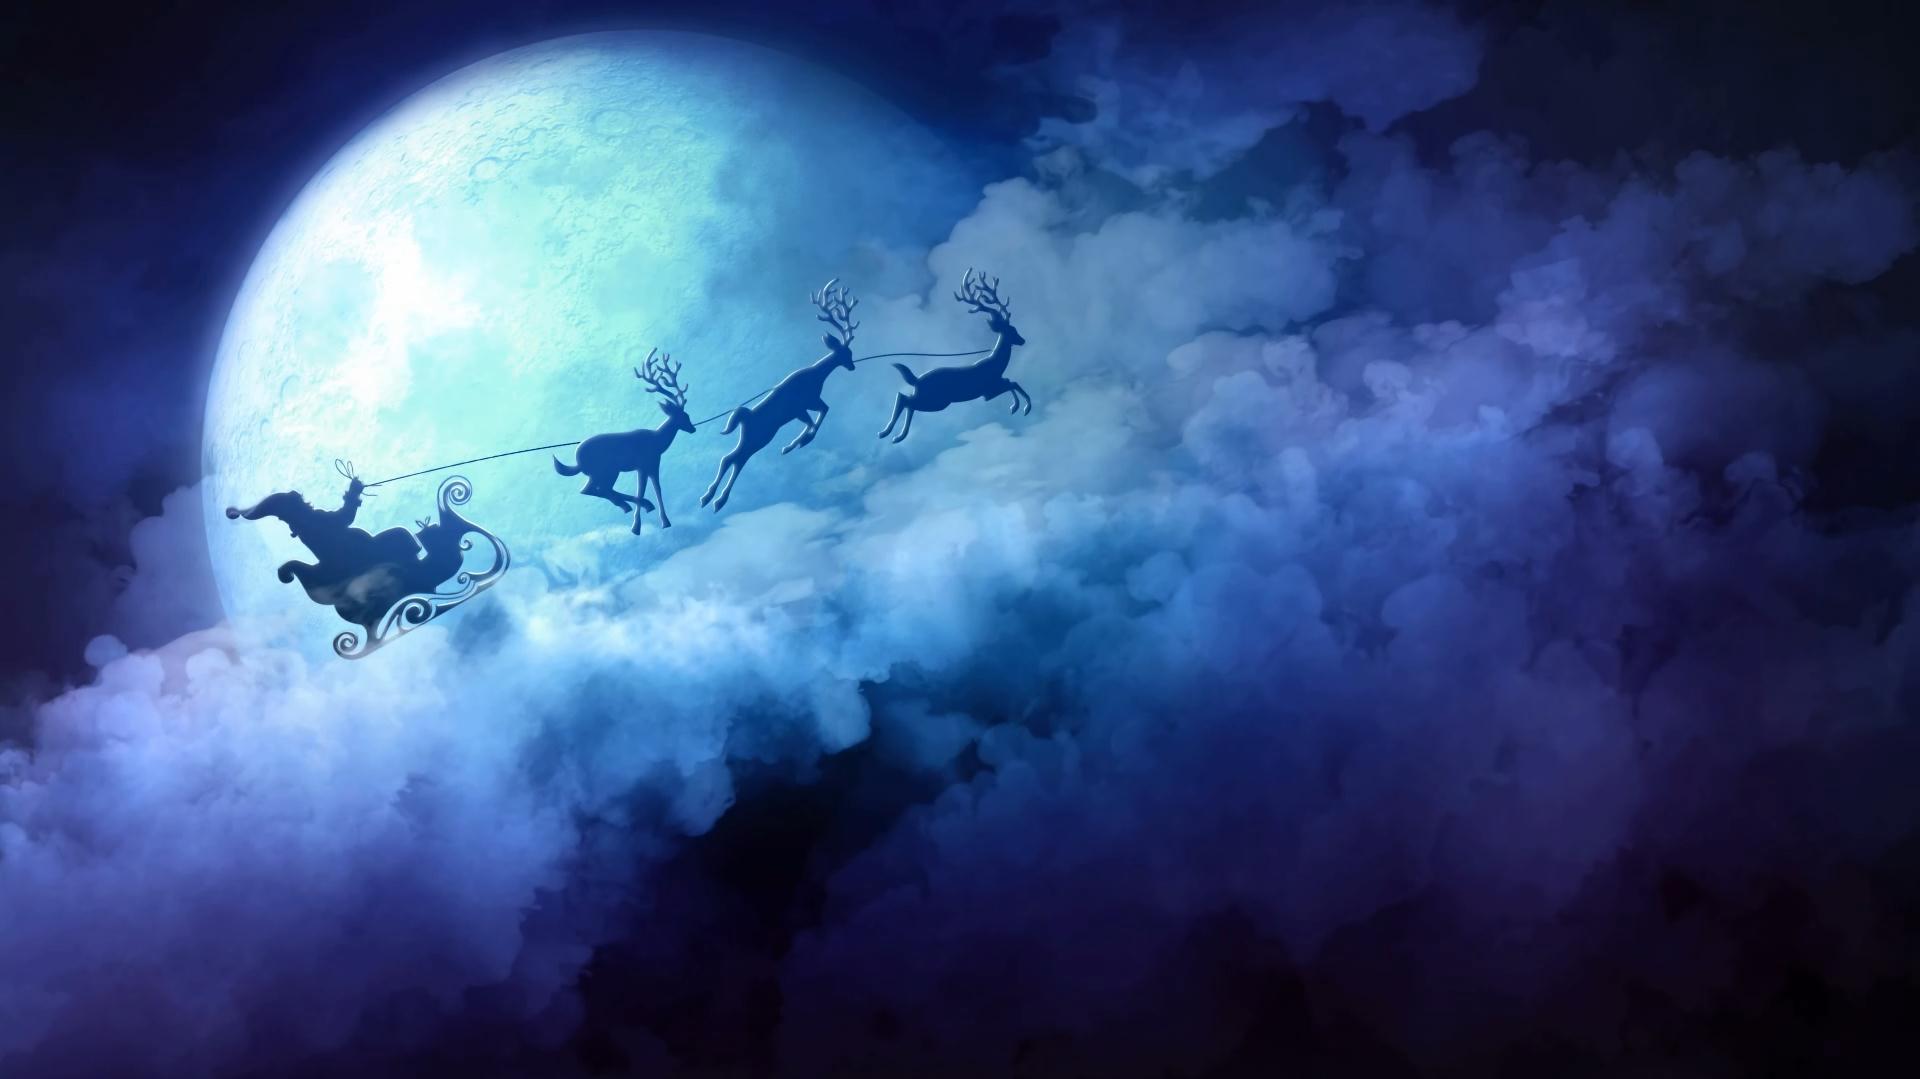 Animated Wallpapers for your Christmas Holiday Desktop Forum